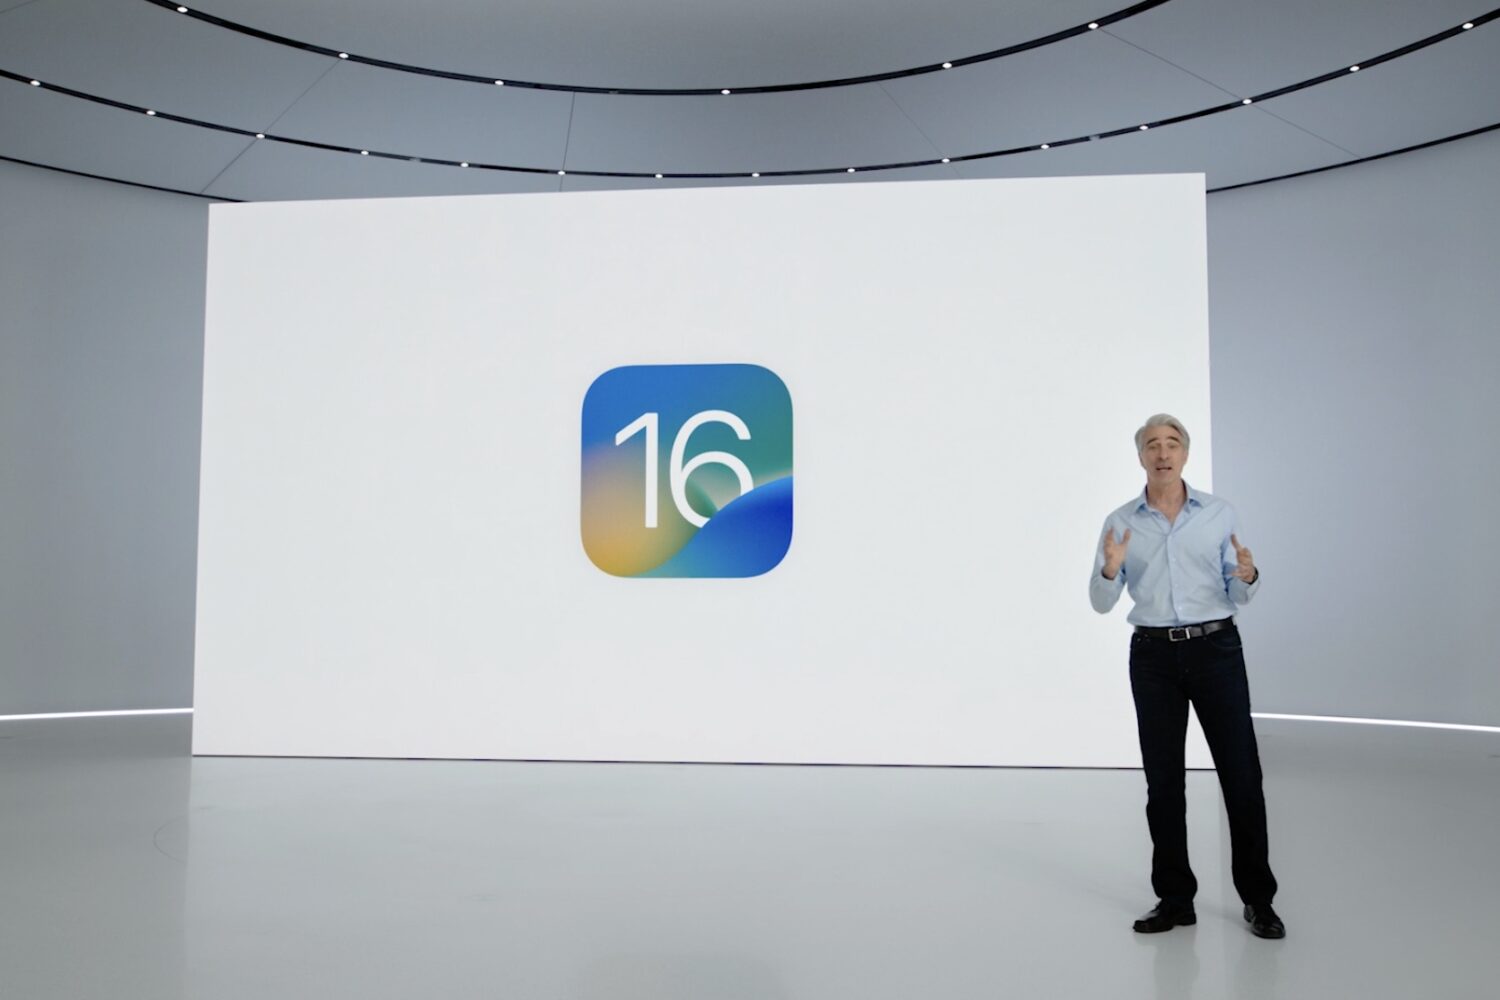 A scene from the June 6 WWDC 2022 keynote, with Apple's software chief Craig Federighi standing in front of a slide showcasing the iOS 16 icon